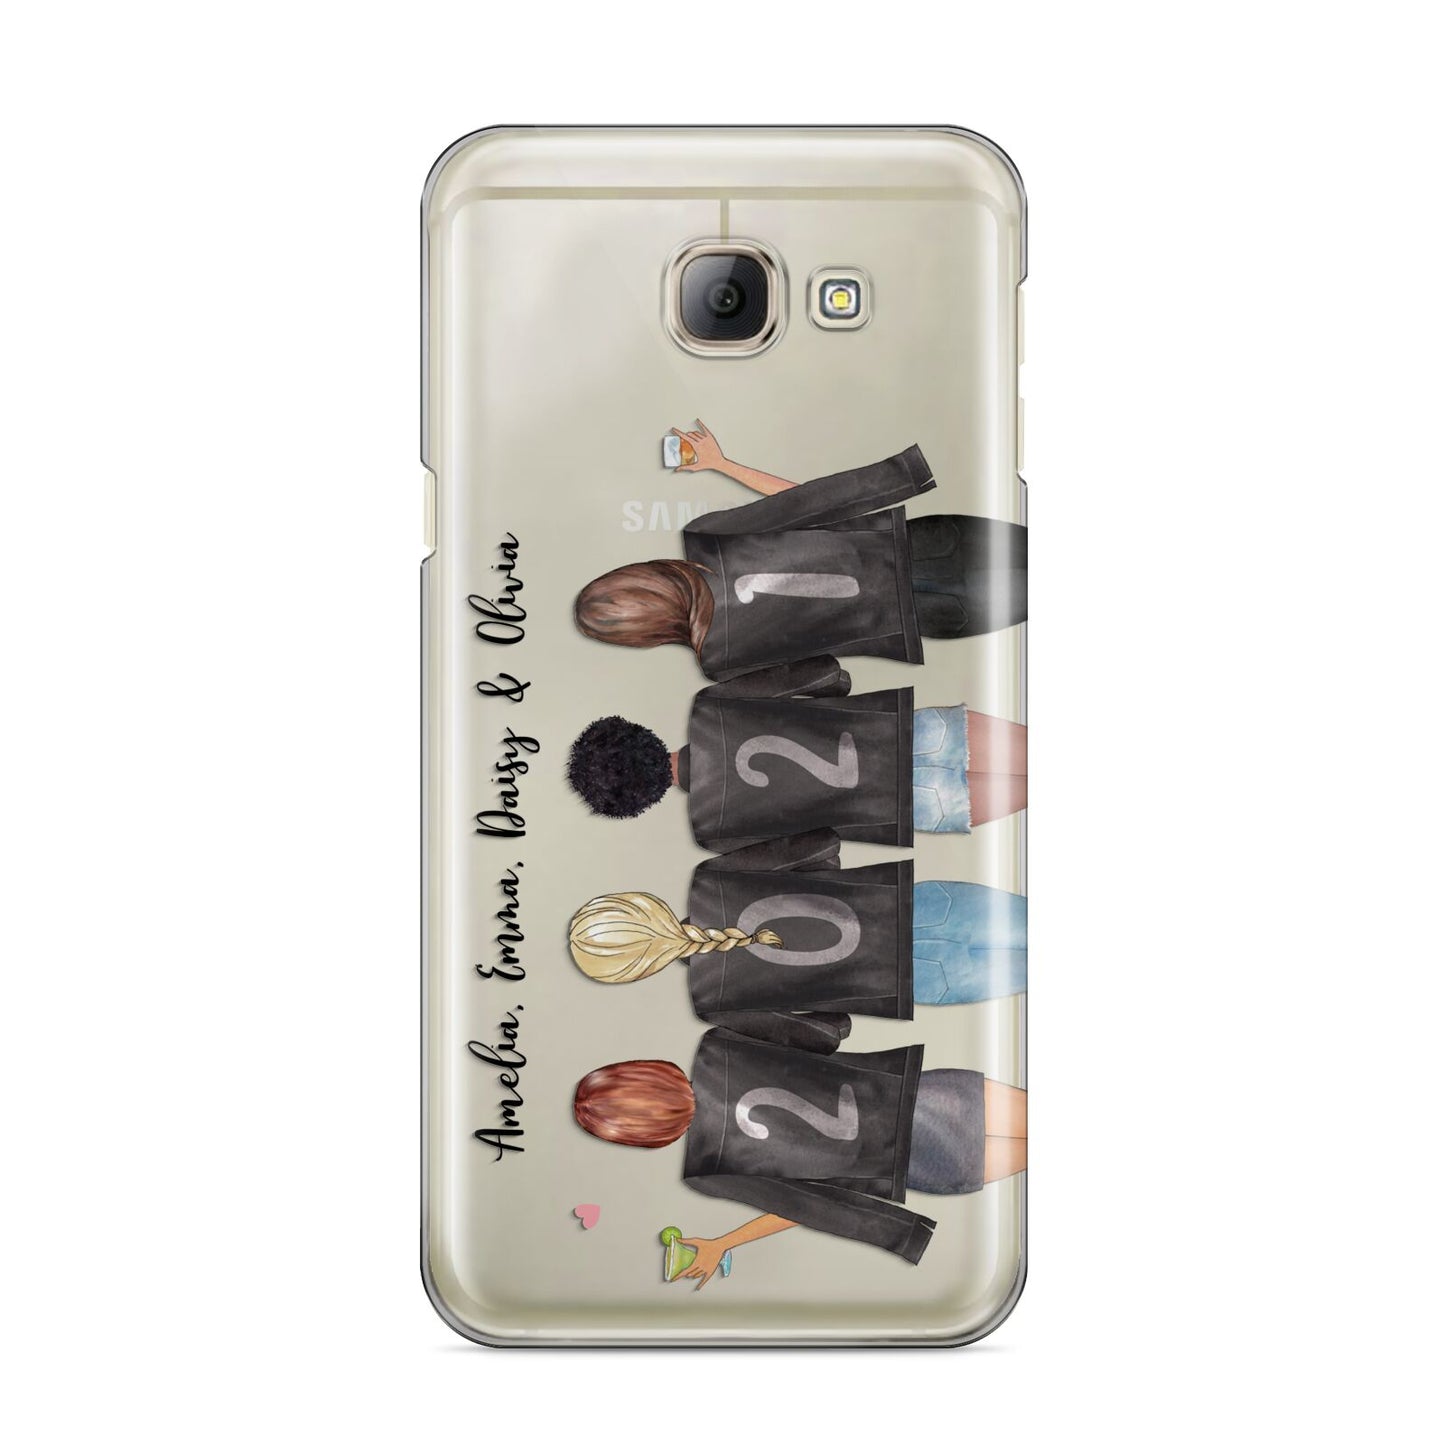 4 Best Friends with Names Samsung Galaxy A8 2016 Case